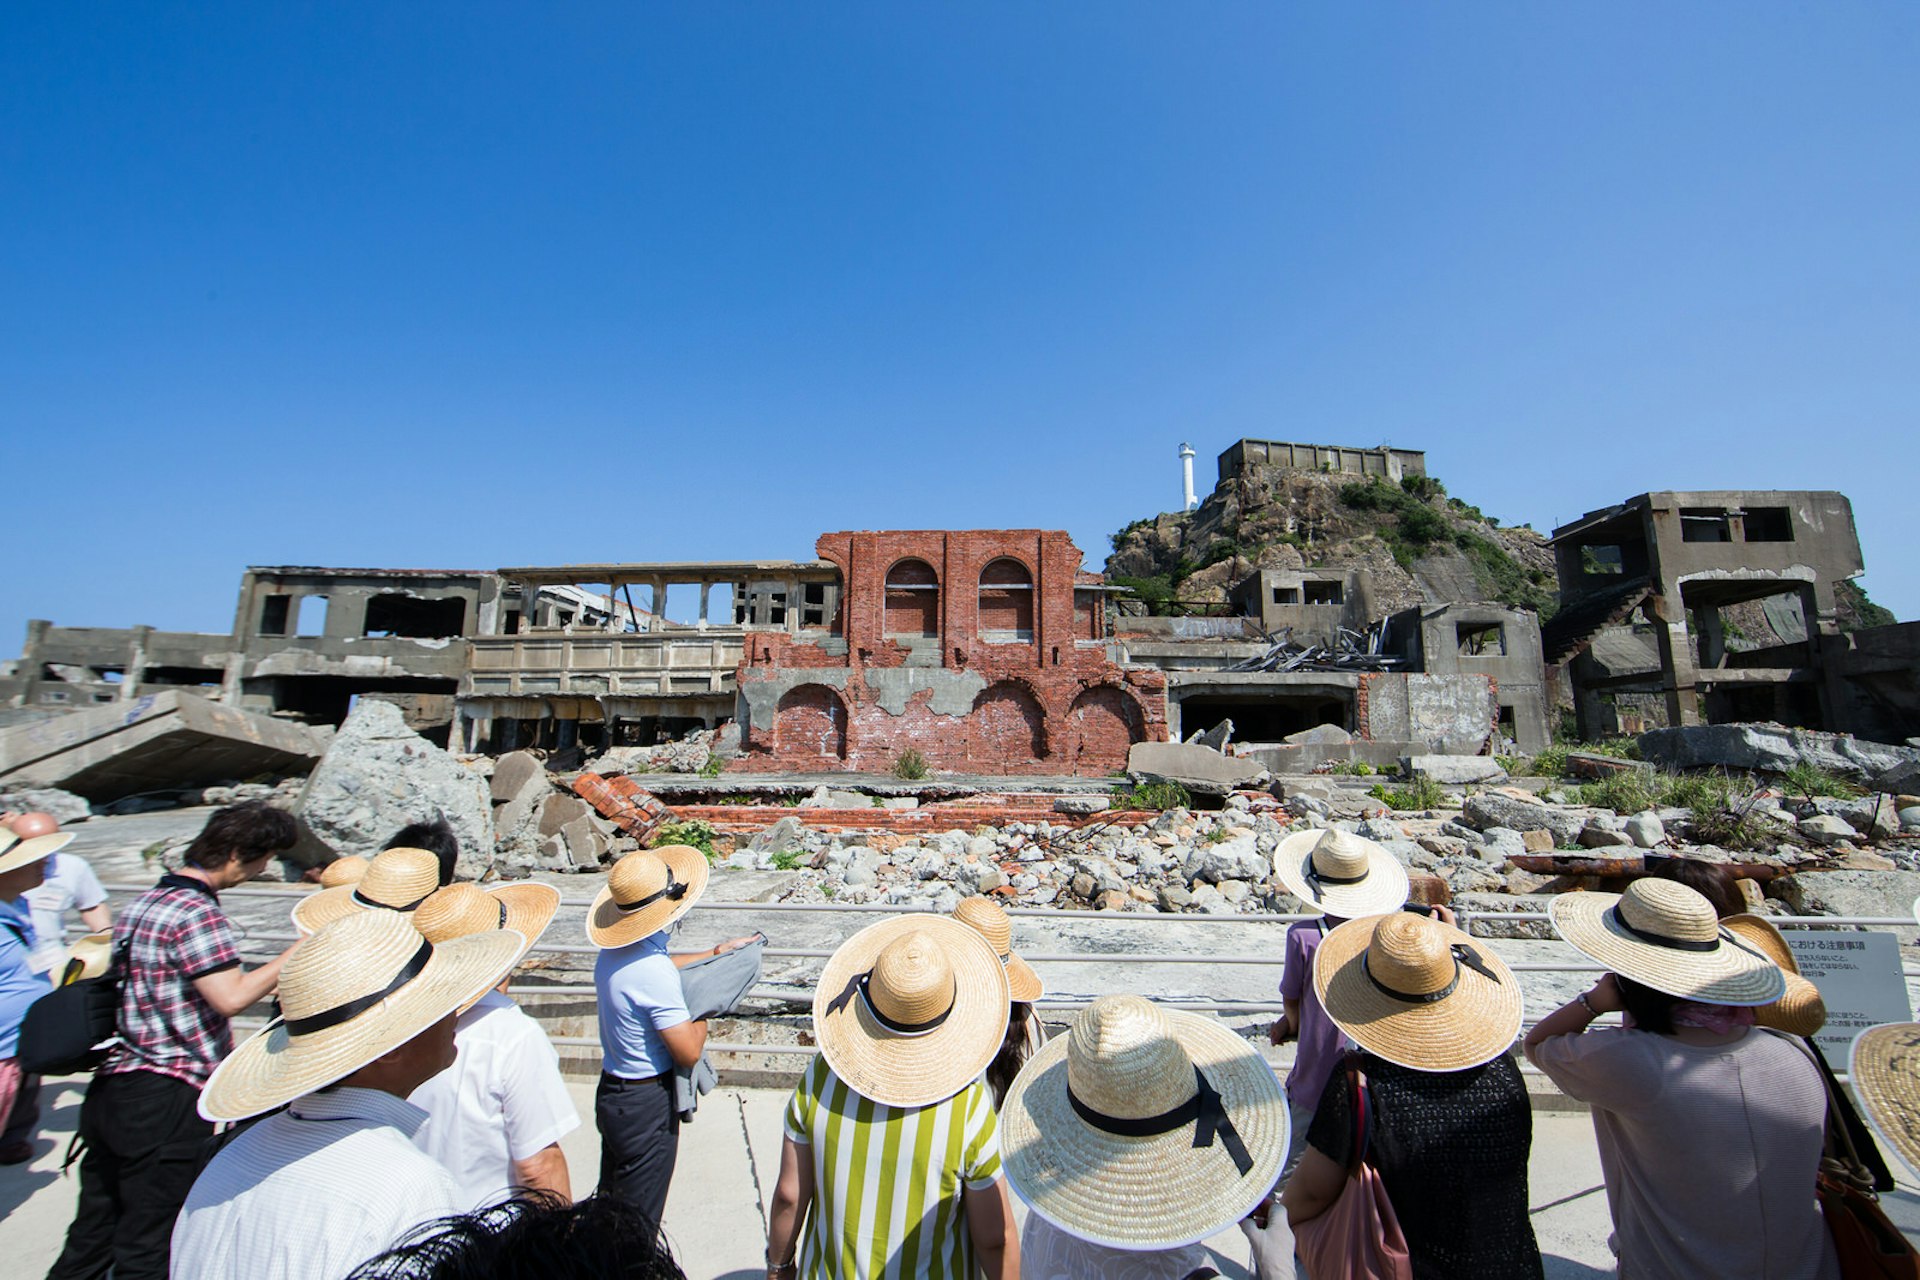 A group of tourists visiting Hashima Island off the coast of Nagasaki, Japan © Morten Falch Sortland / Getty Images